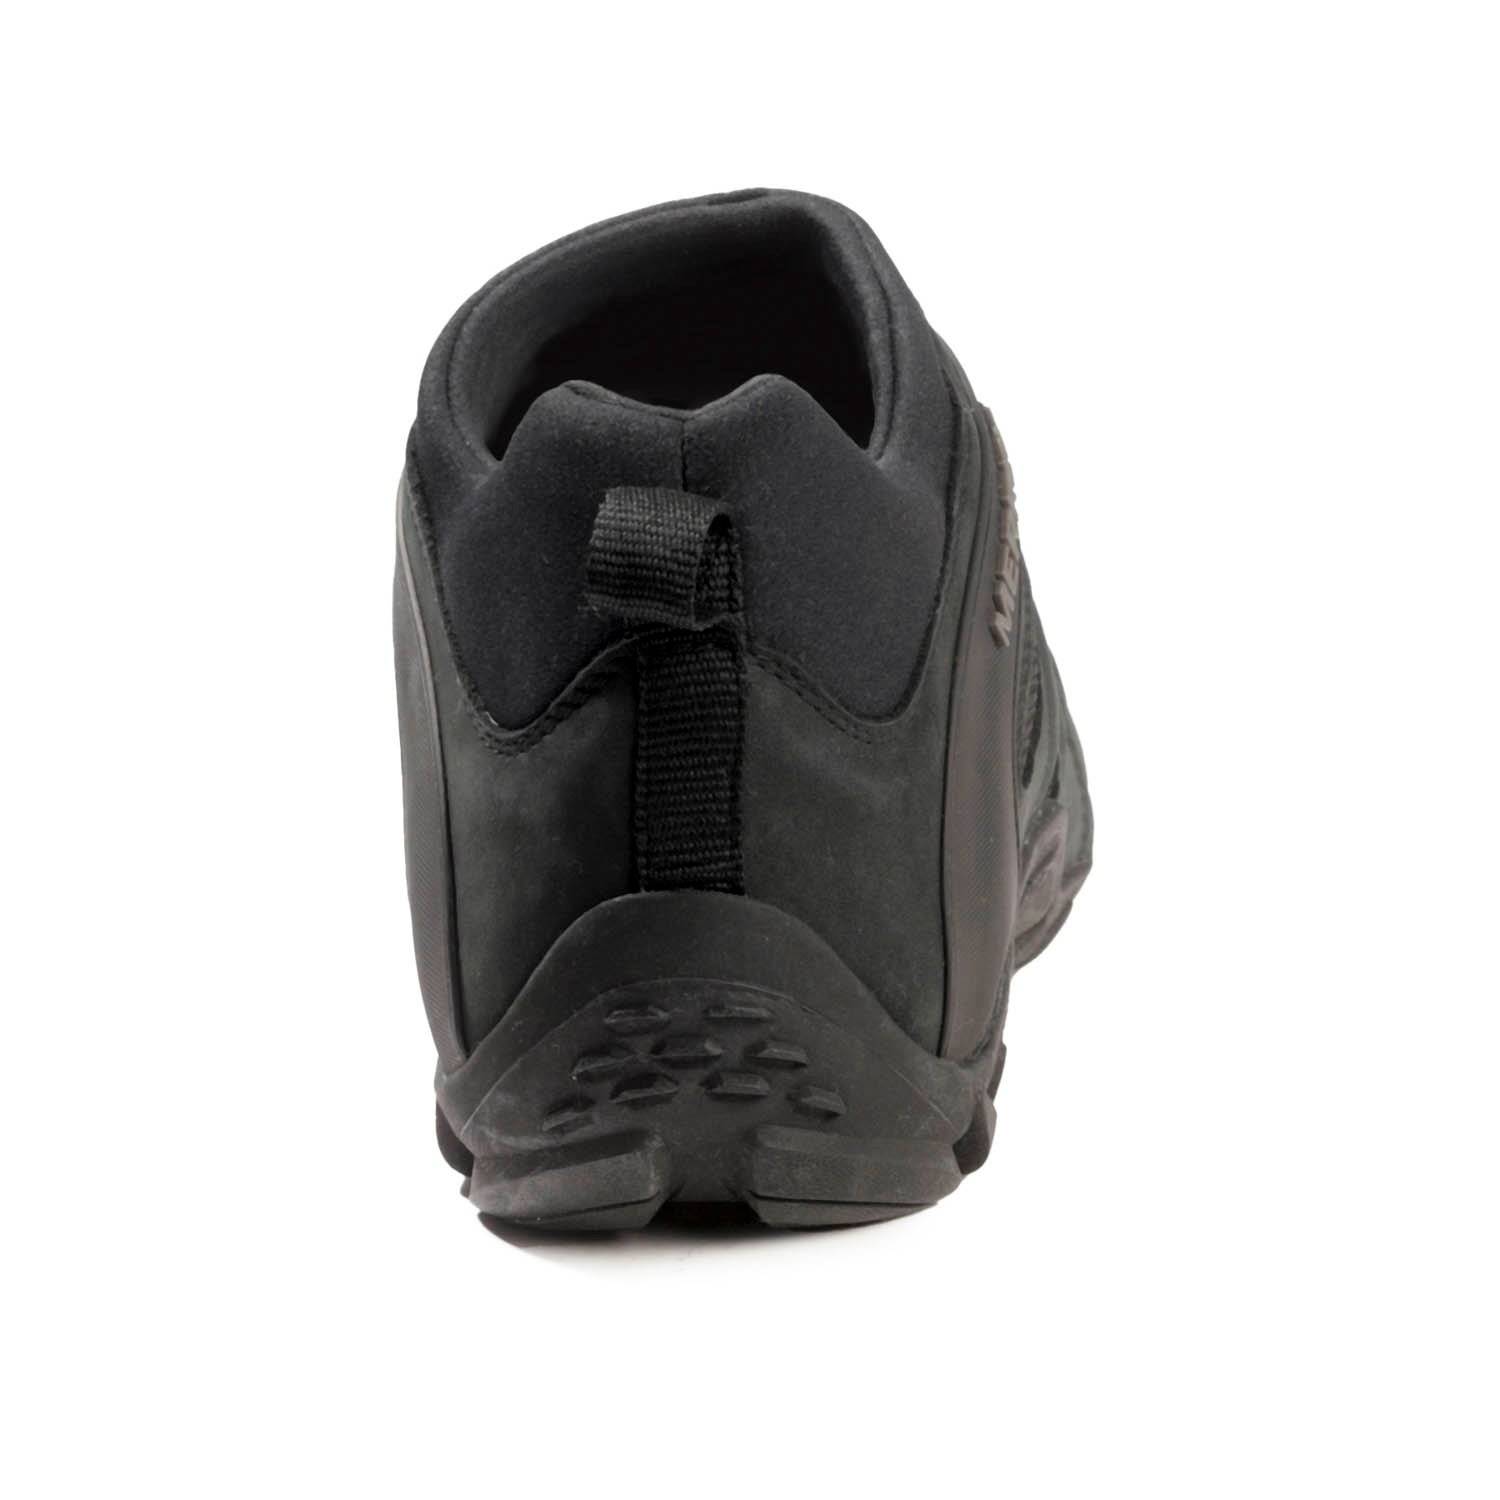 Merrell Tactical Chameleon 8 Stretch Tactical Shoes